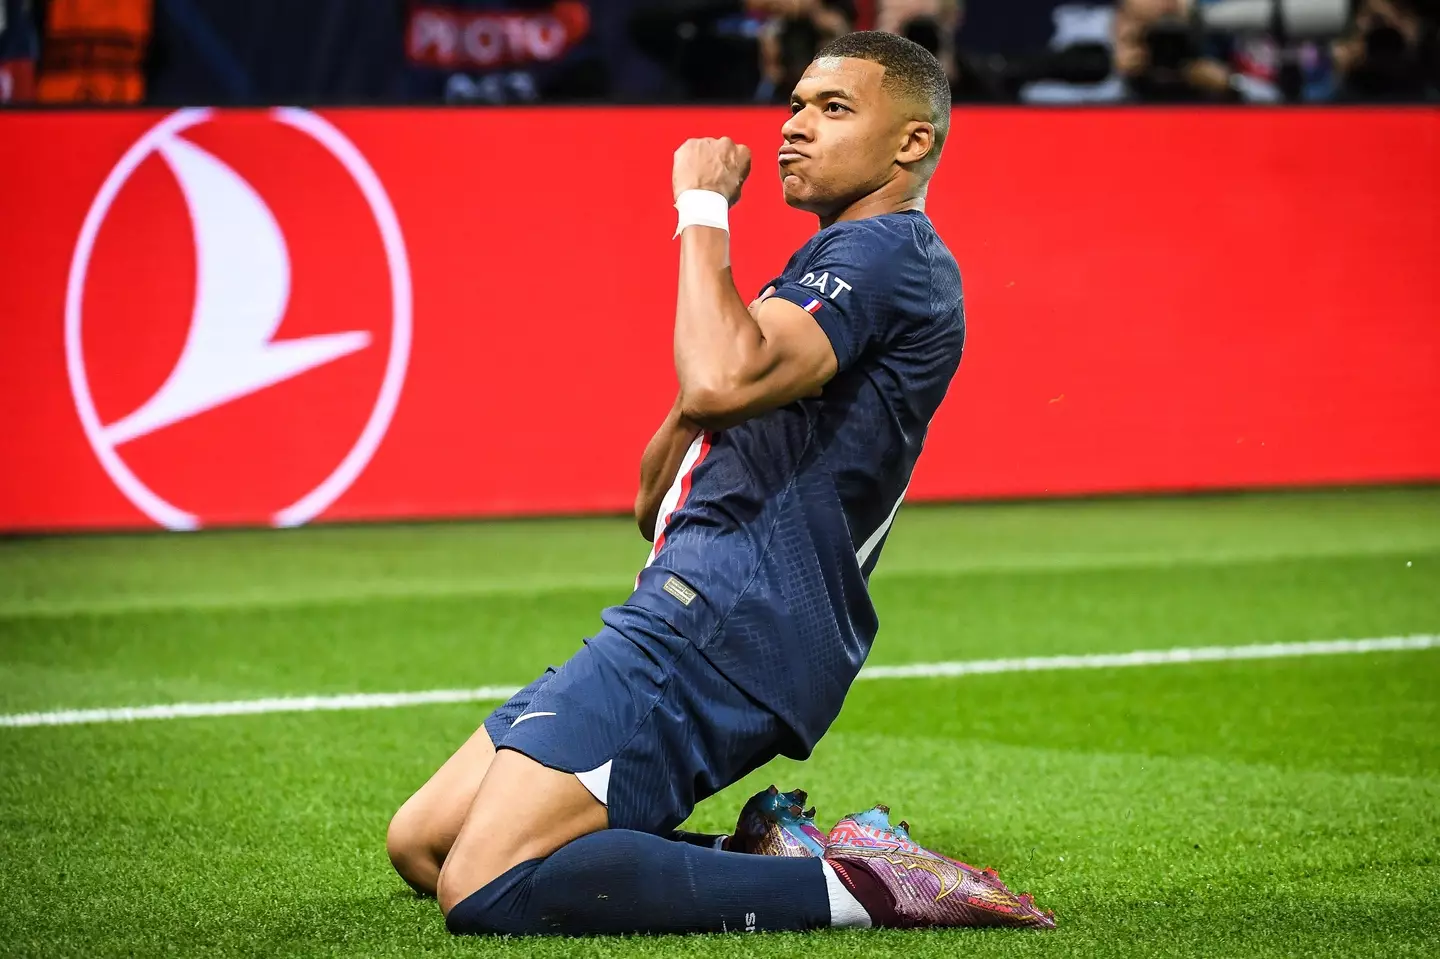 Kylian Mbappe wheels away in celebration after scoring against Benfica. Image: Alamy